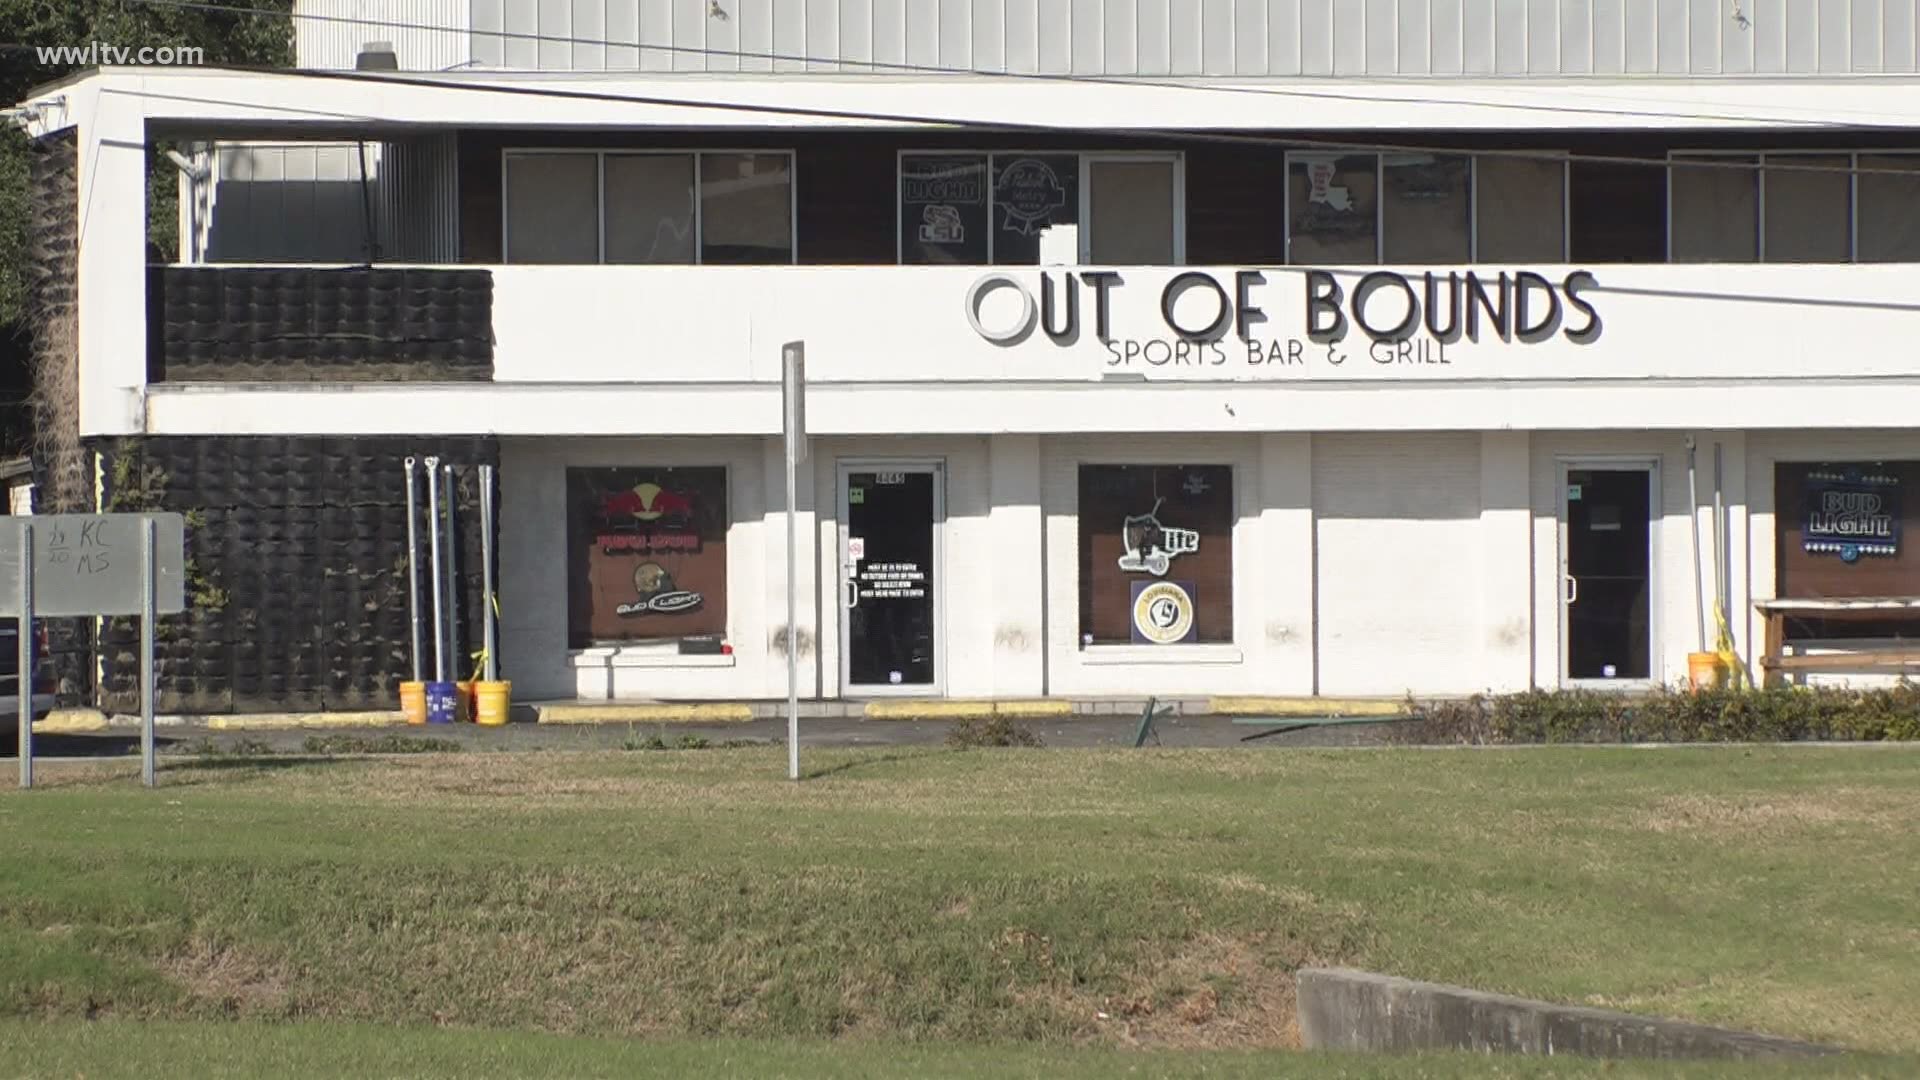 Out of Bounds owner says the video must have been taken before the pandemic.